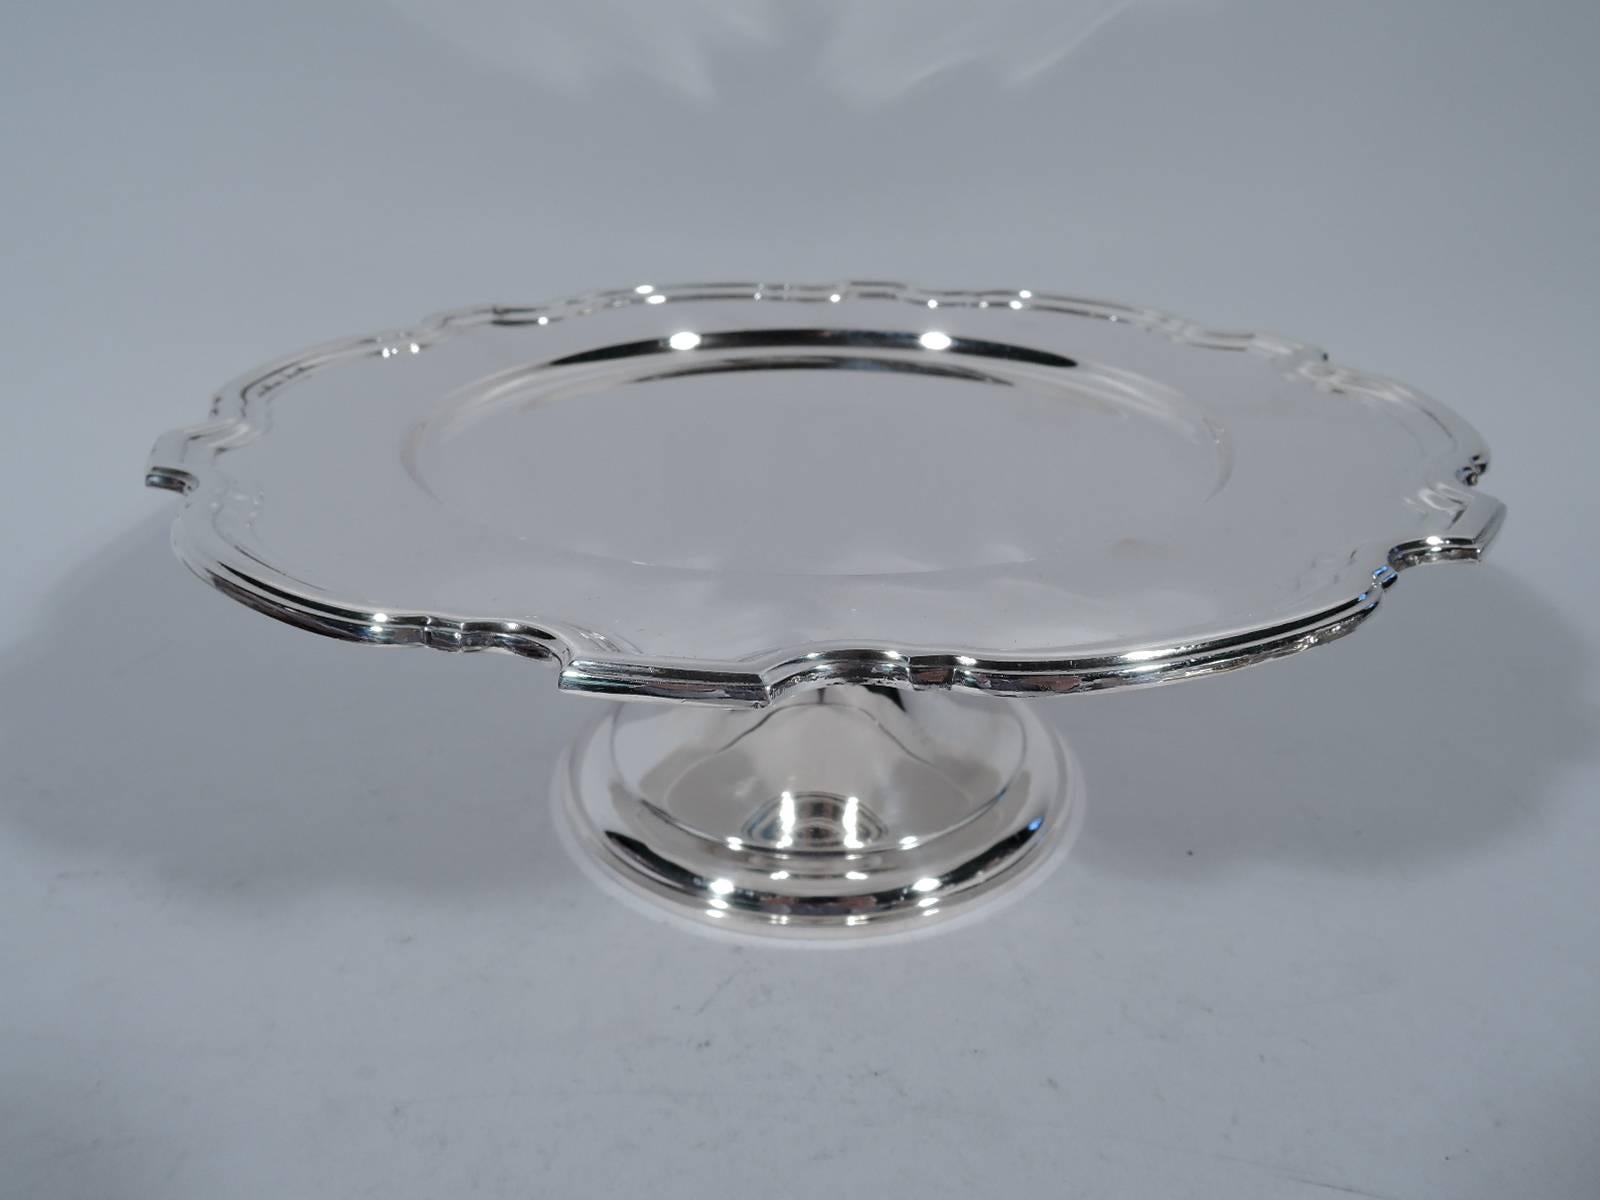 Sweet sterling silver compote. Made by Tiffany & Co. in New York. Shallow well and molded curvilinear rim. An old-fashioned design with a suggestion of the Georgian piecrust motif. Hallmark includes pattern no. 23065 and director’s letter M